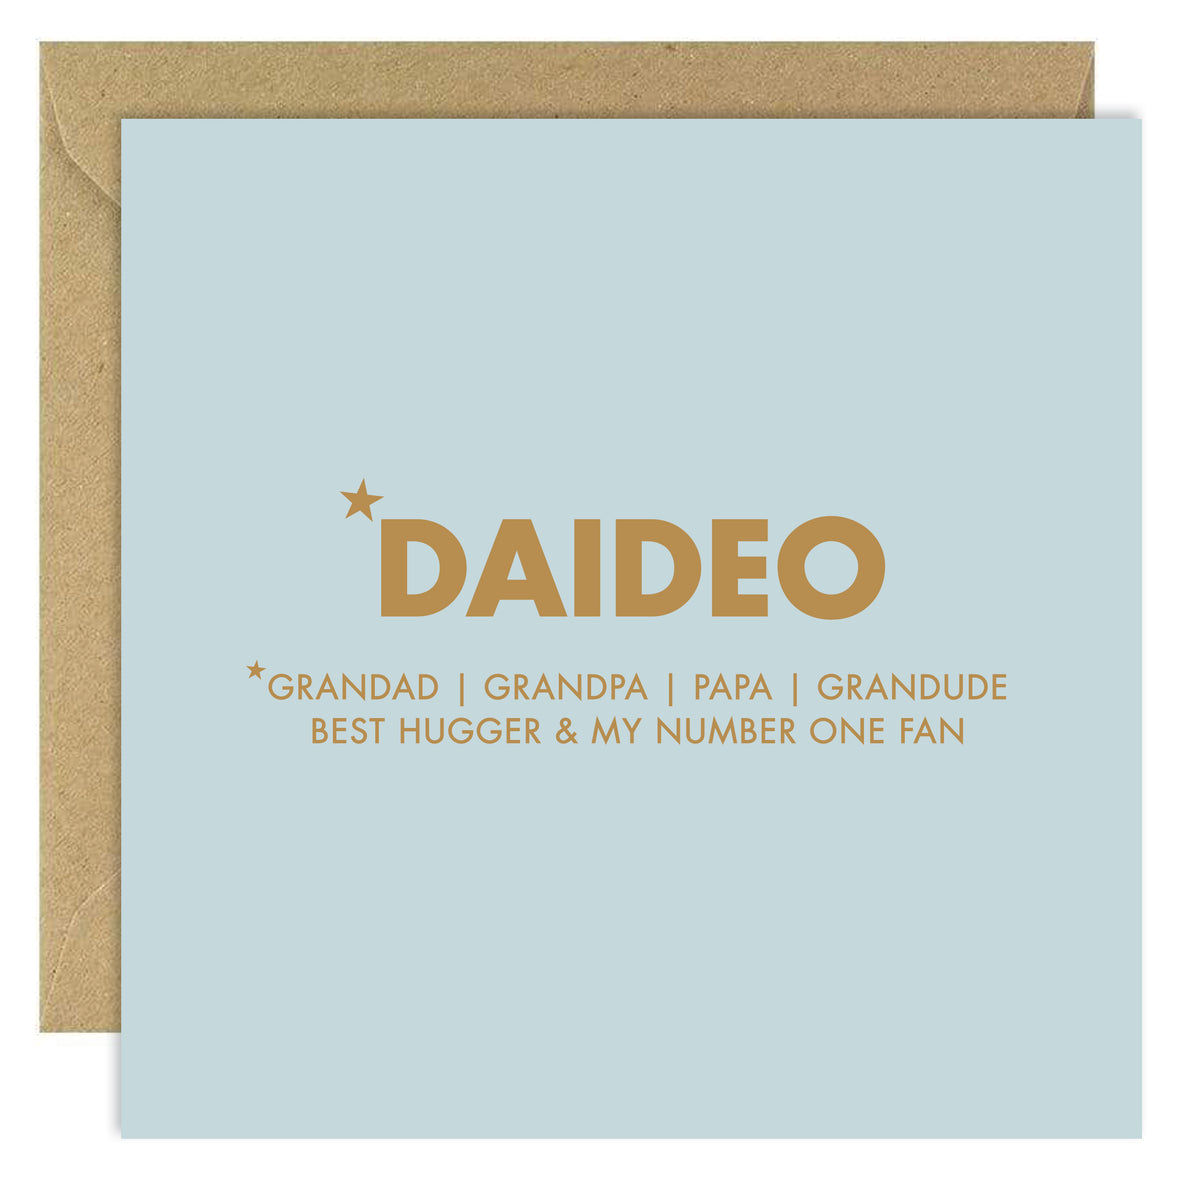 Daideo